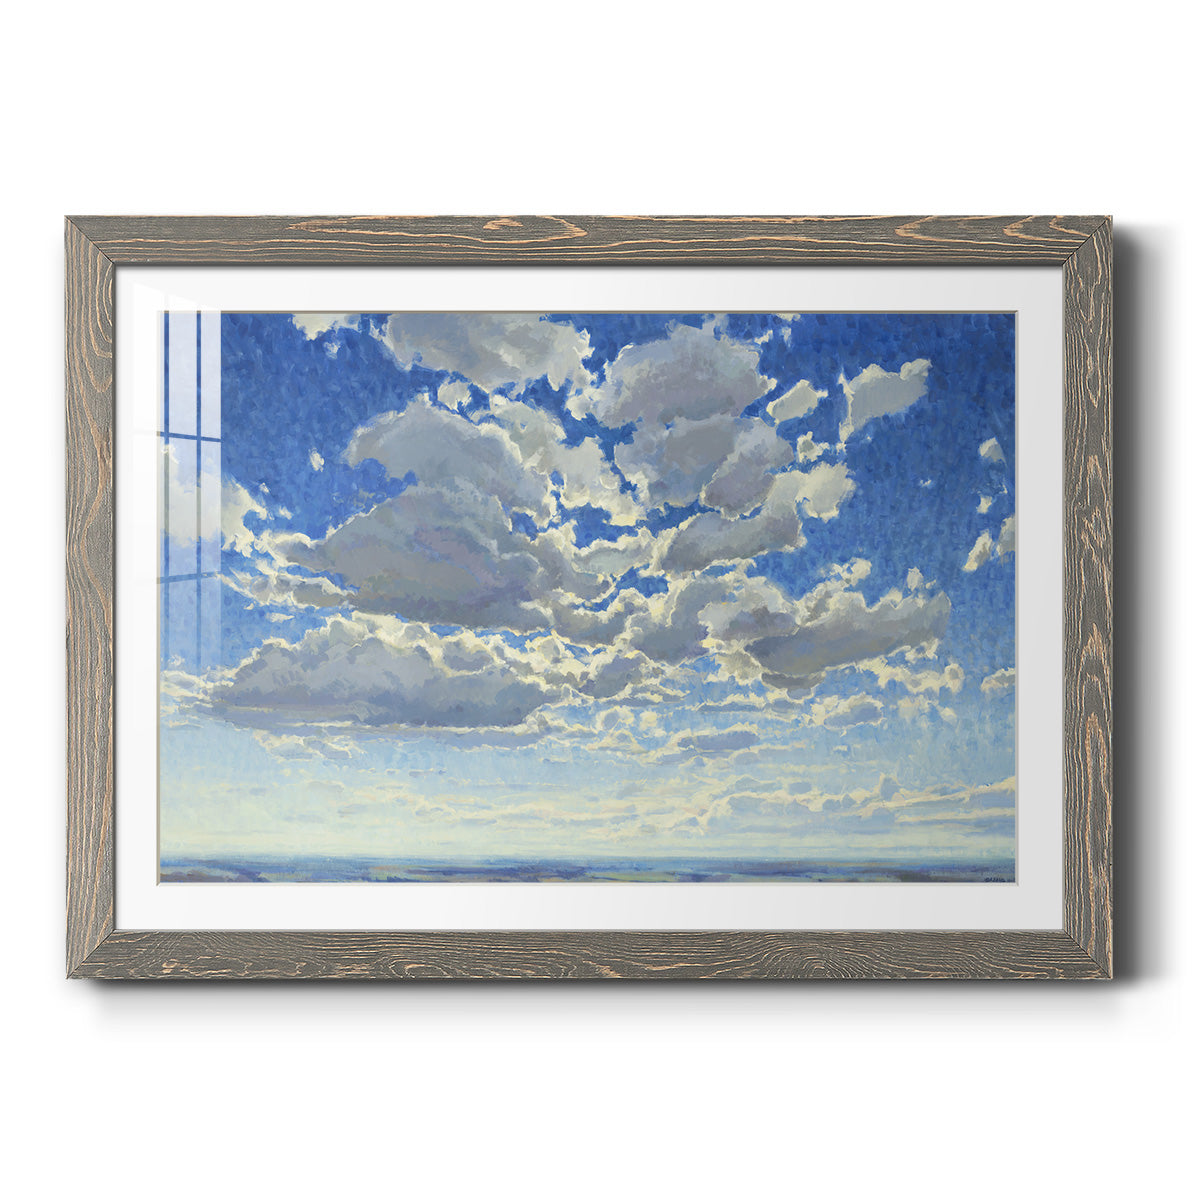 UBRM165-Premium Framed Print - Ready to Hang